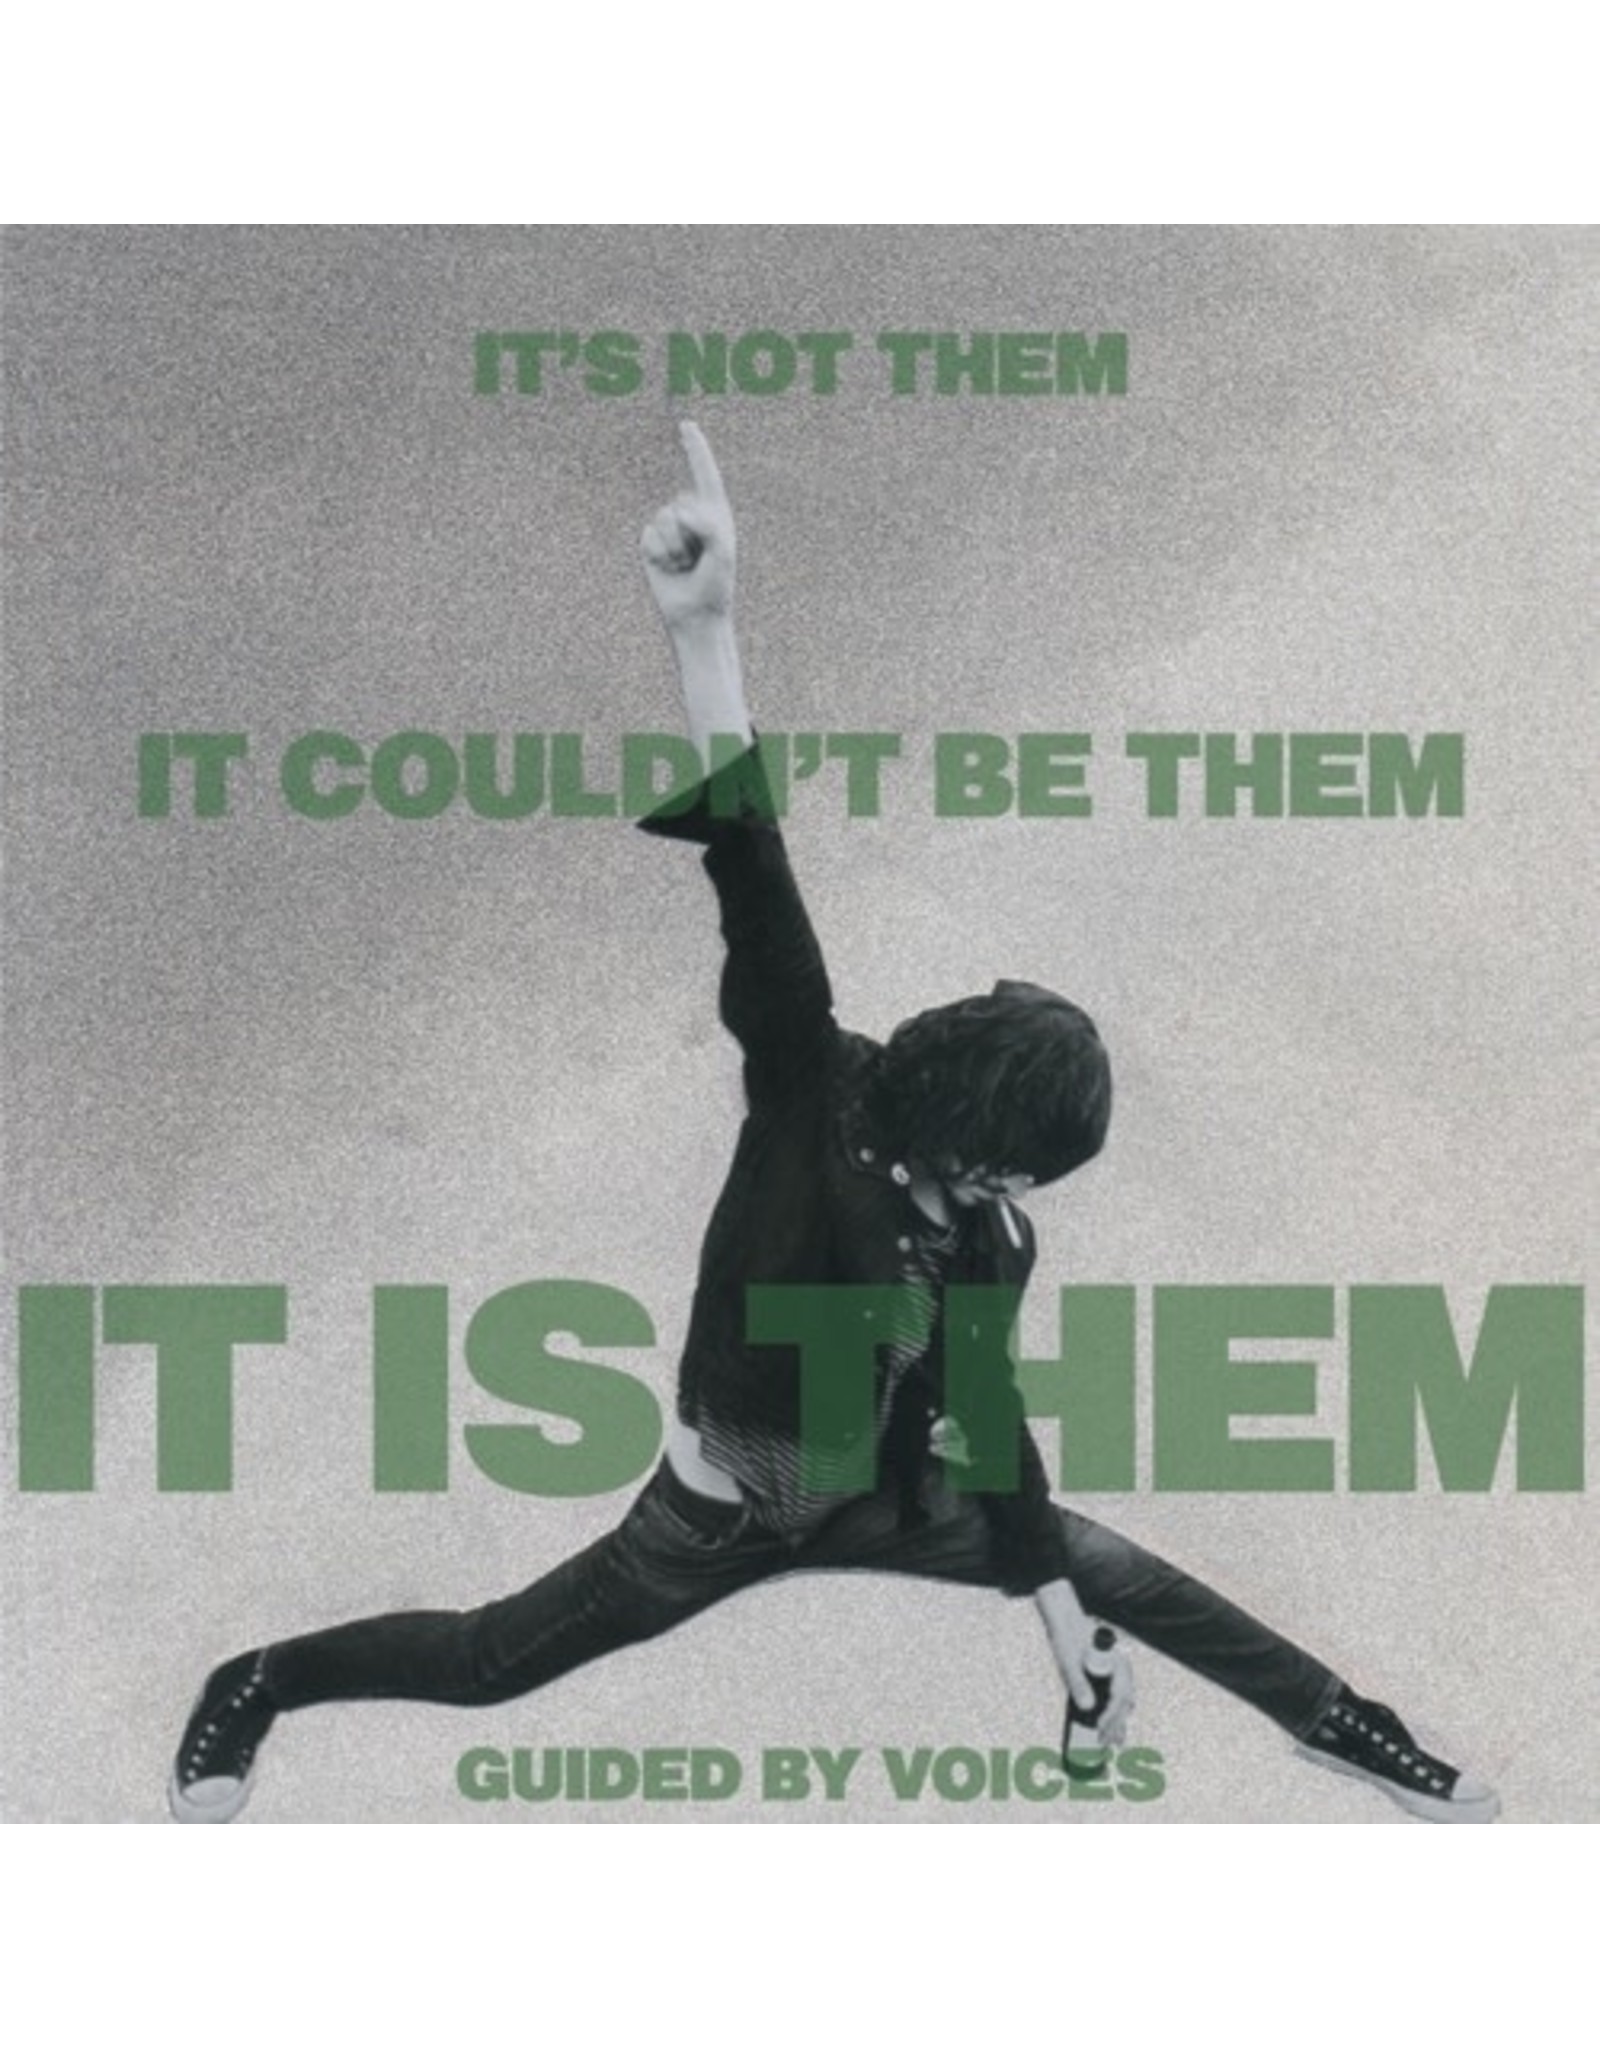 New Vinyl Guided By Voices - It's Not Them. It Couldn't Be Them. It Is Them! LP